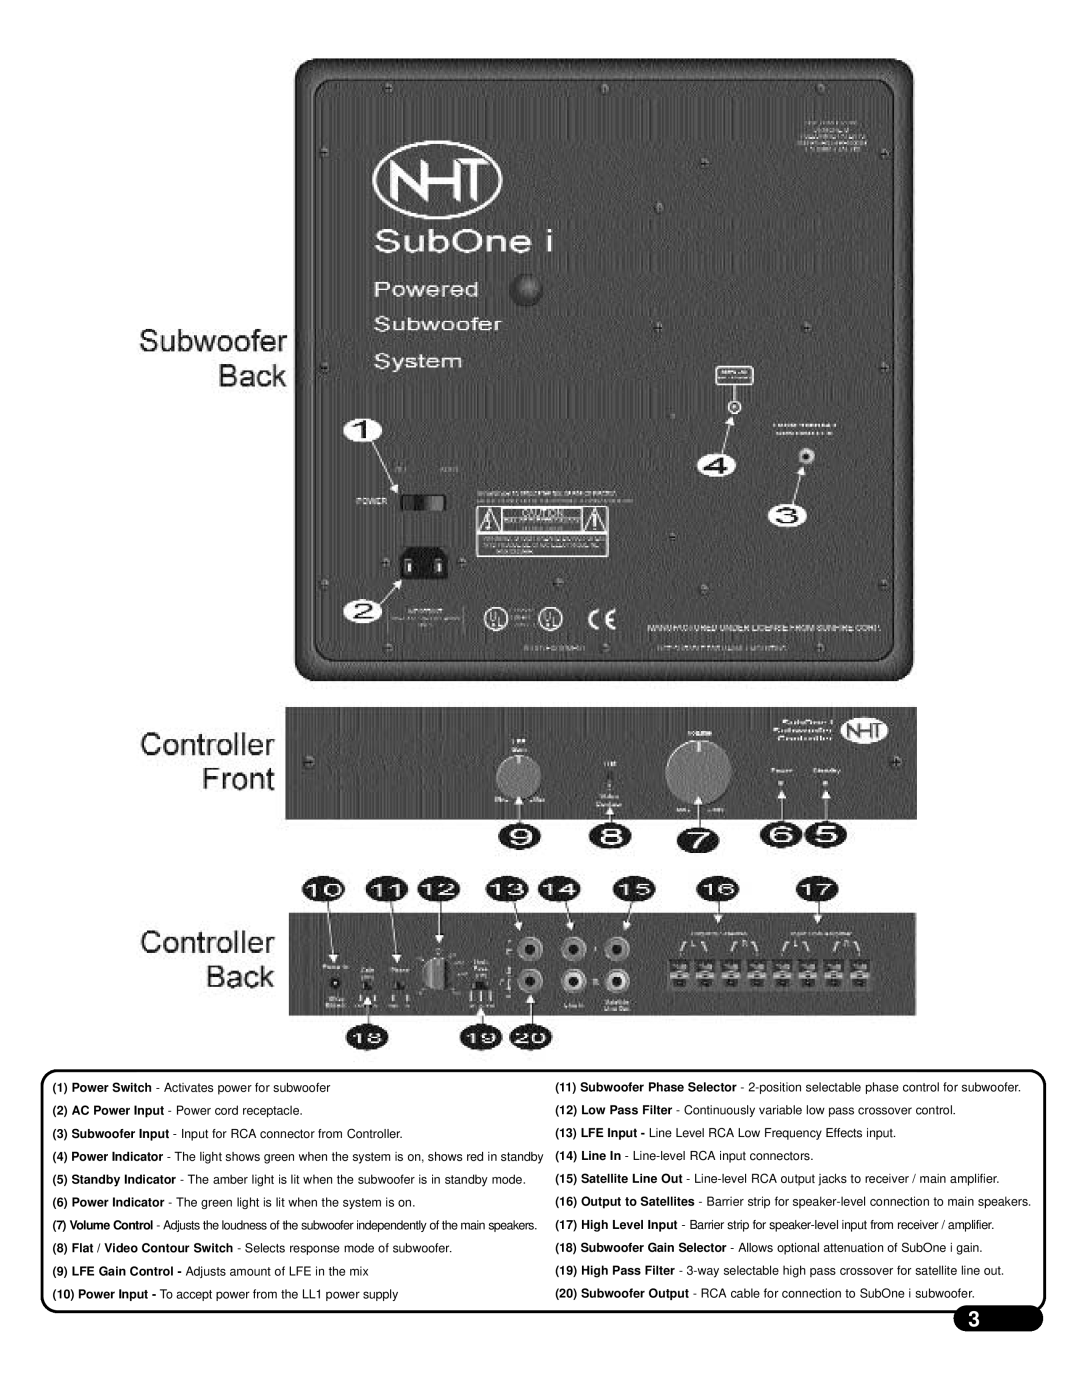 NHT SubOne i user manual 1Power Switch - Activates power for subwoofer 